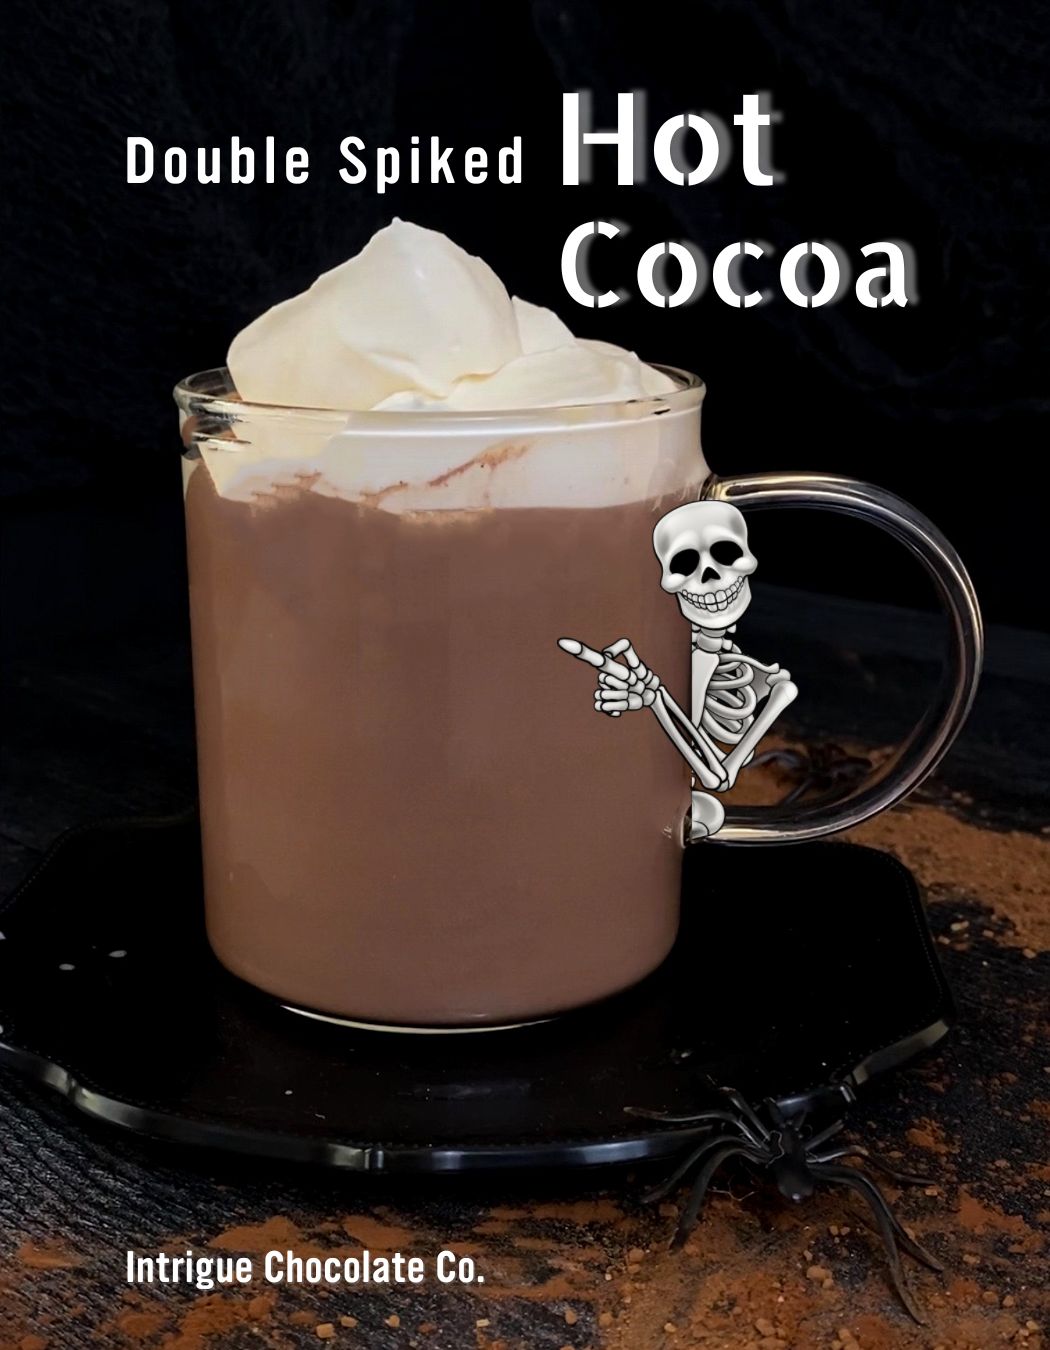 Double Spiked Hot Cocoa